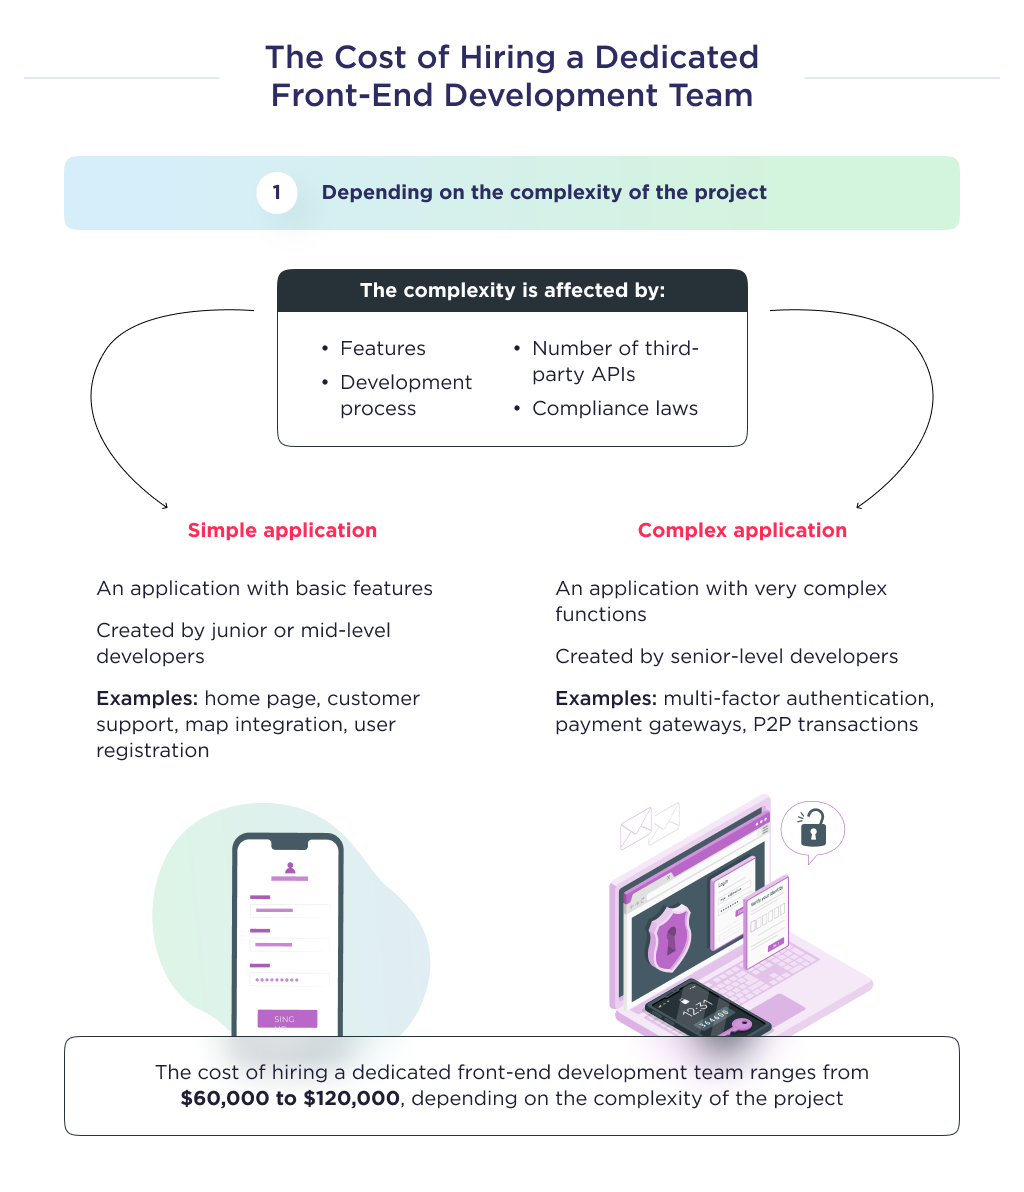 The cost of hiring a dedicated team of front-end developers, depending on the complexity of the project